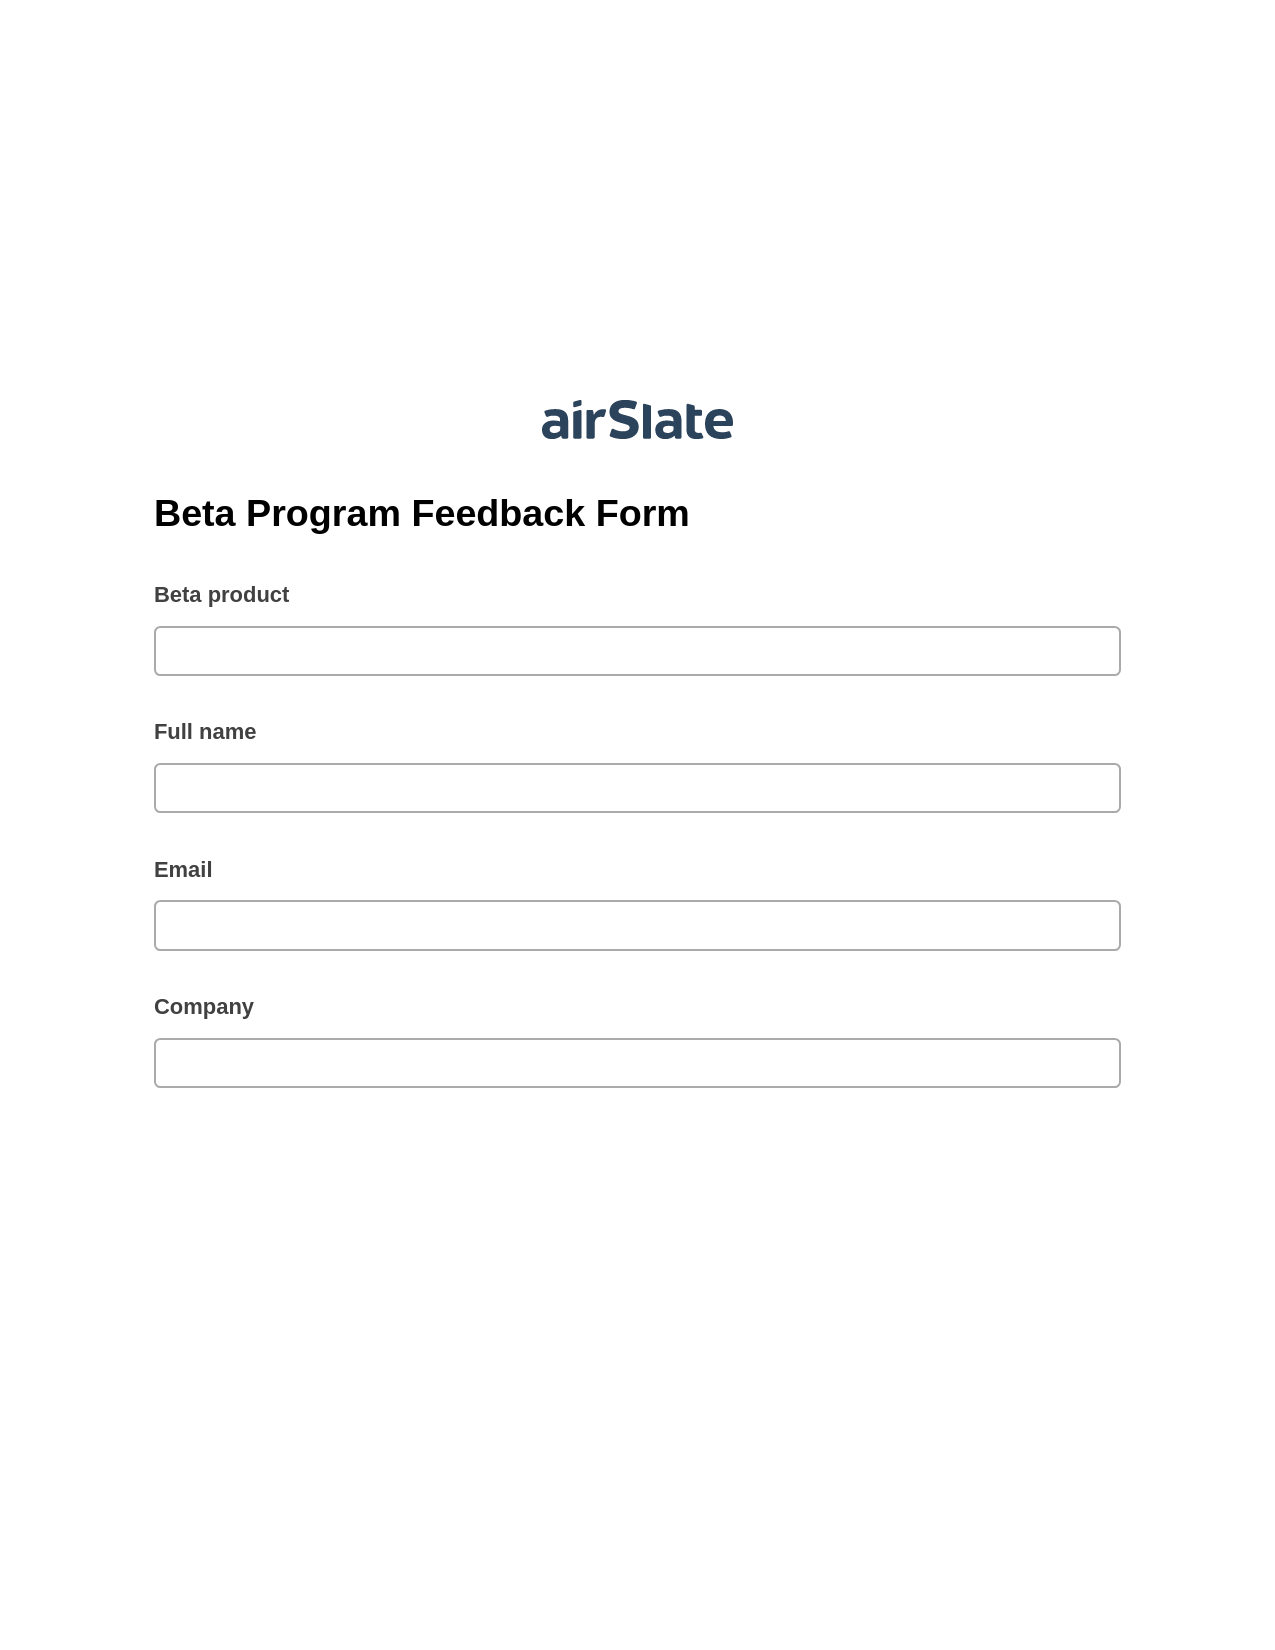 Multirole Beta Program Feedback Form Pre-fill from another Slate Bot, Pre-fill with Custom Data Bot, Export to Excel 365 Bot